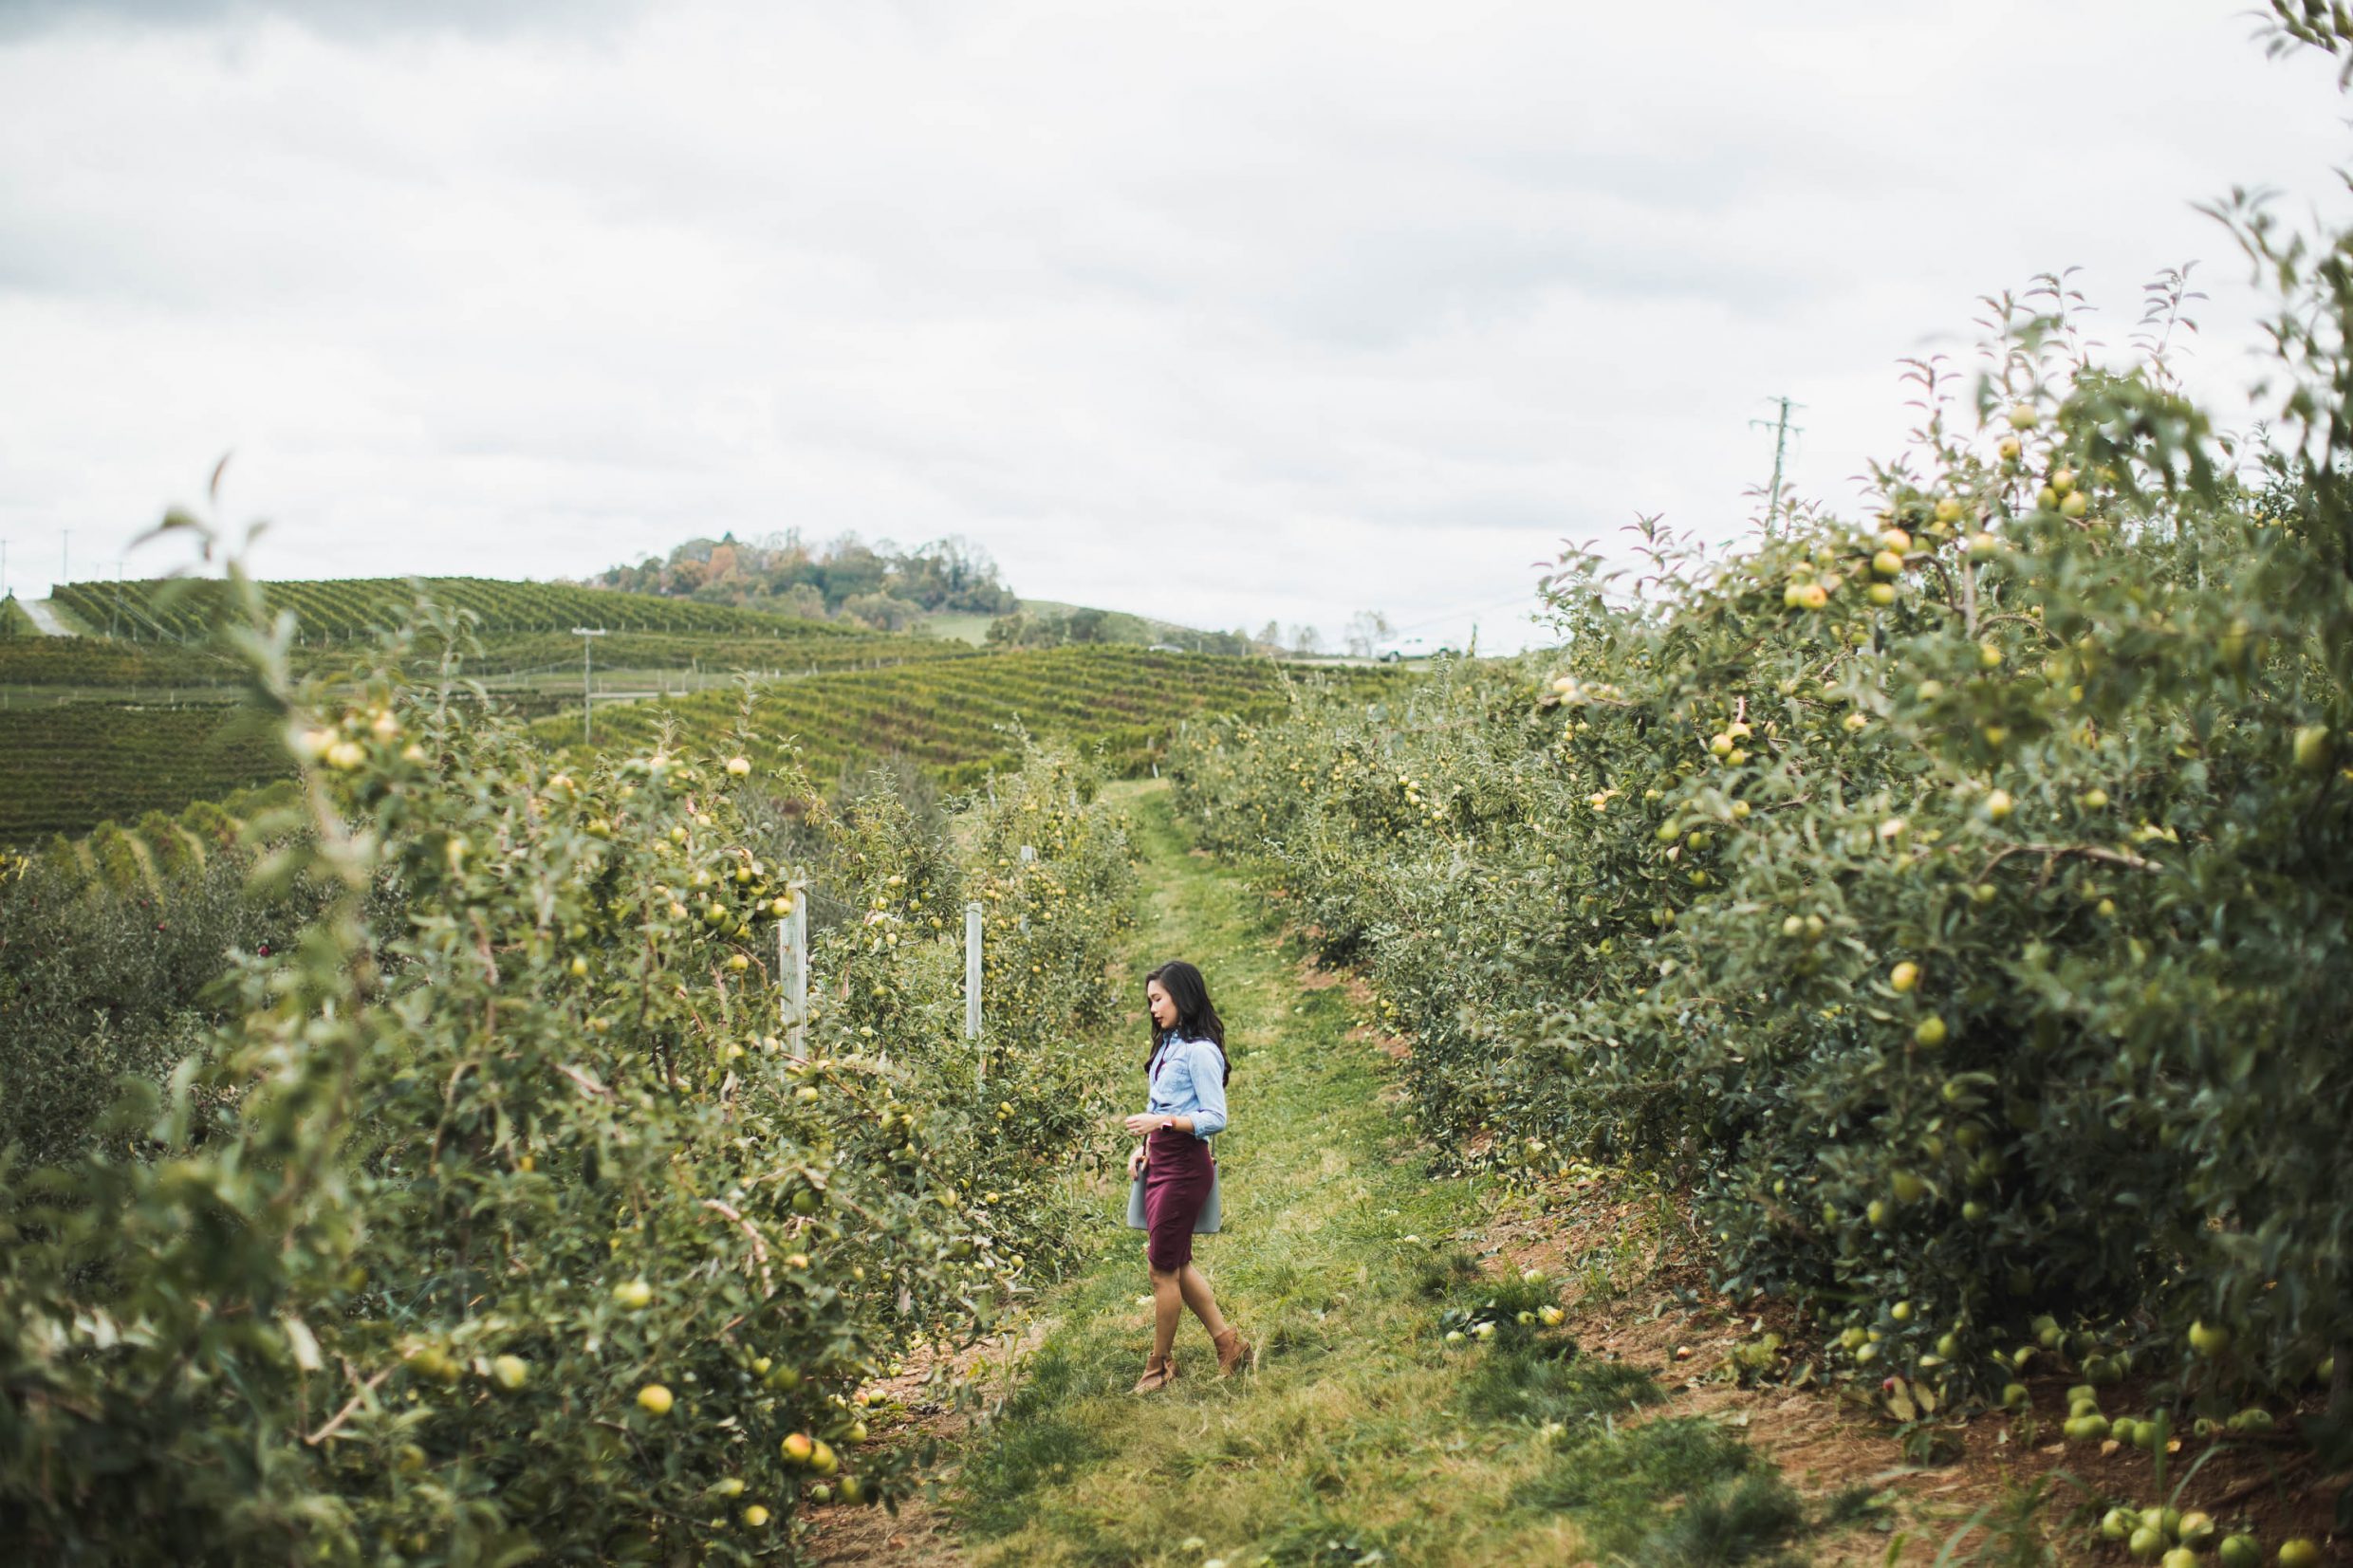 Blogger Hoang-Kim goes apple picking at Carter Mountain Orchard in Virginia